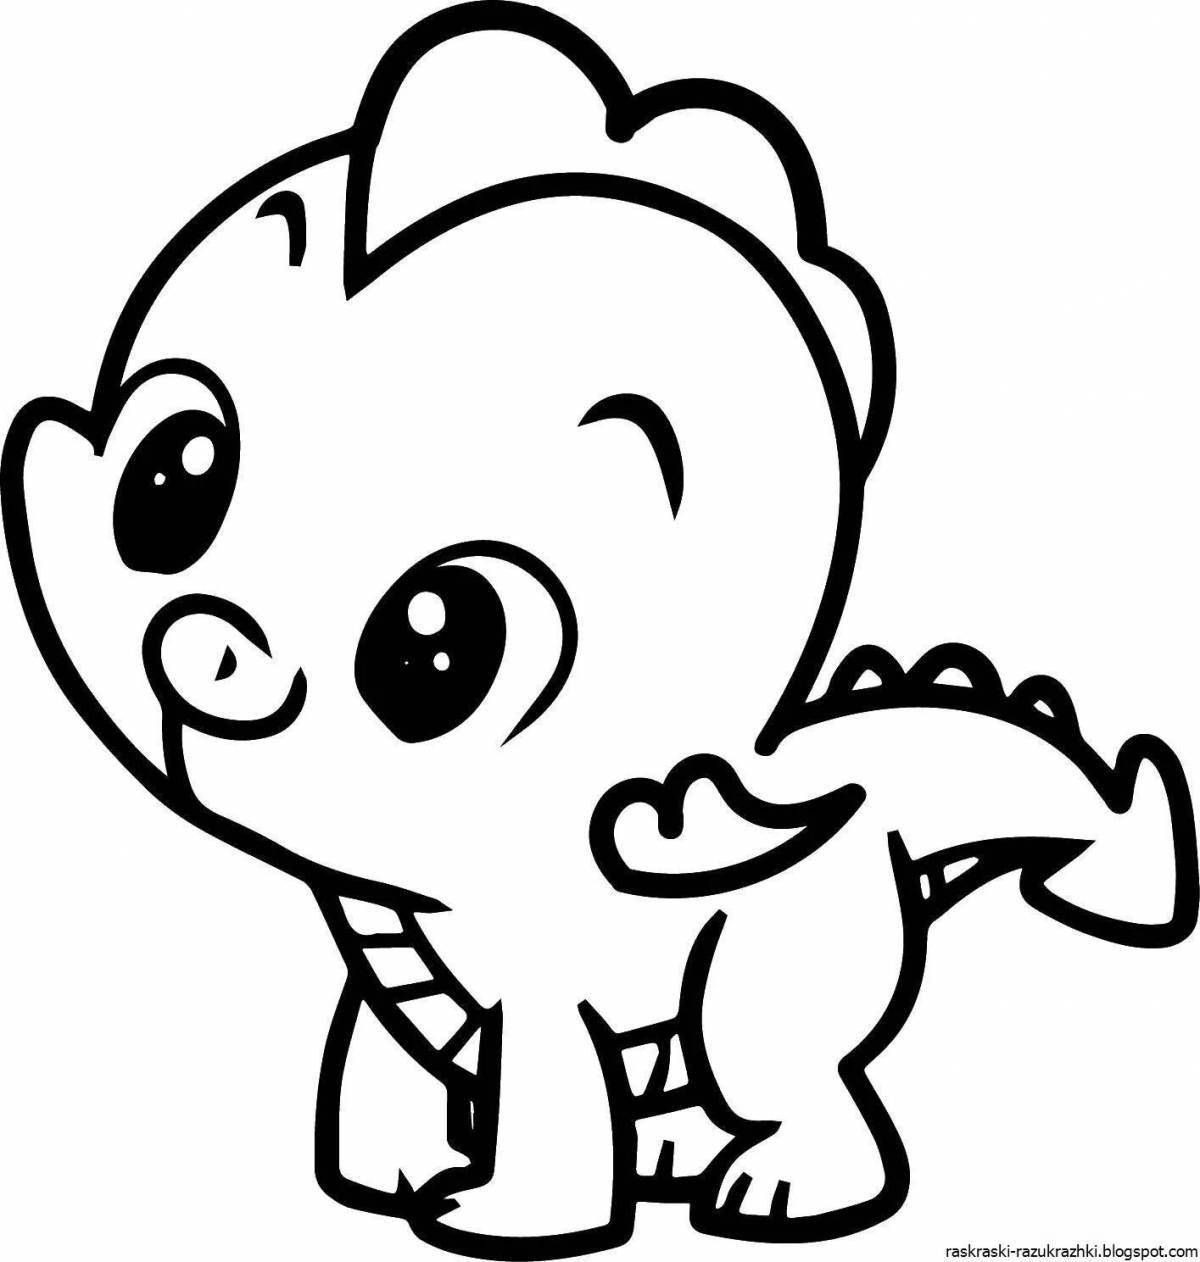 Coloring page friendly cute dinosaur